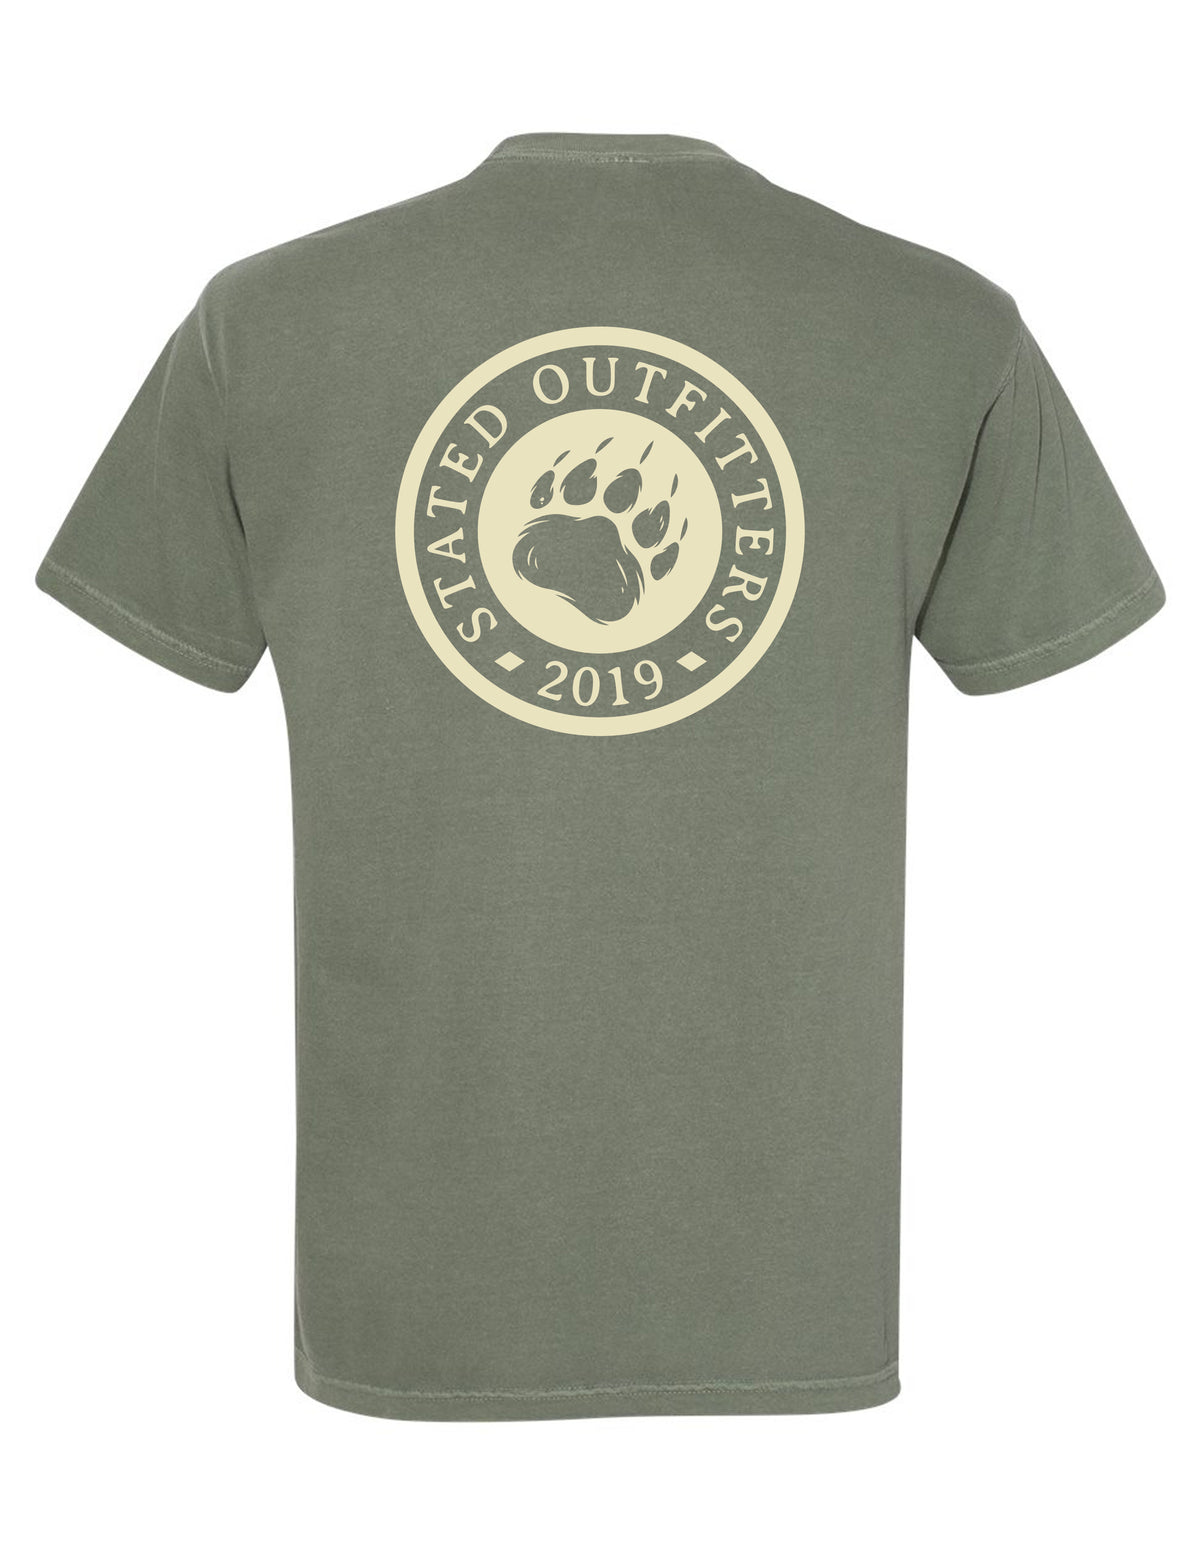 Stated Outfitters Emblem T-Shirt